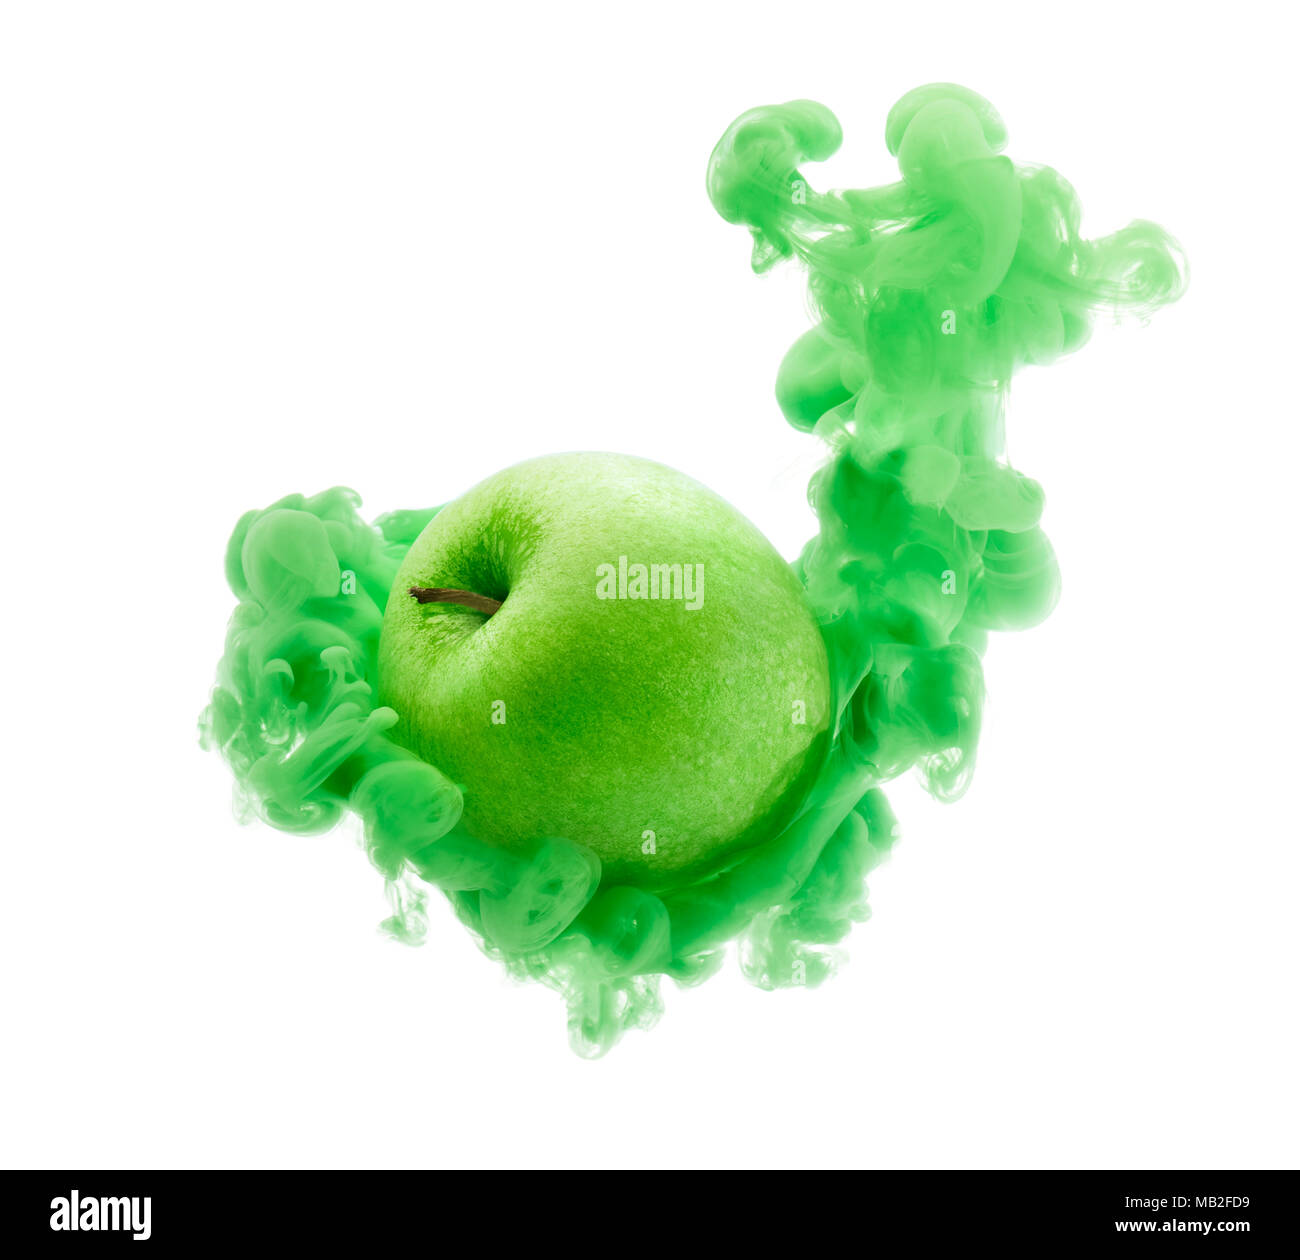 Green apple on ink isolated over white background Stock Photo